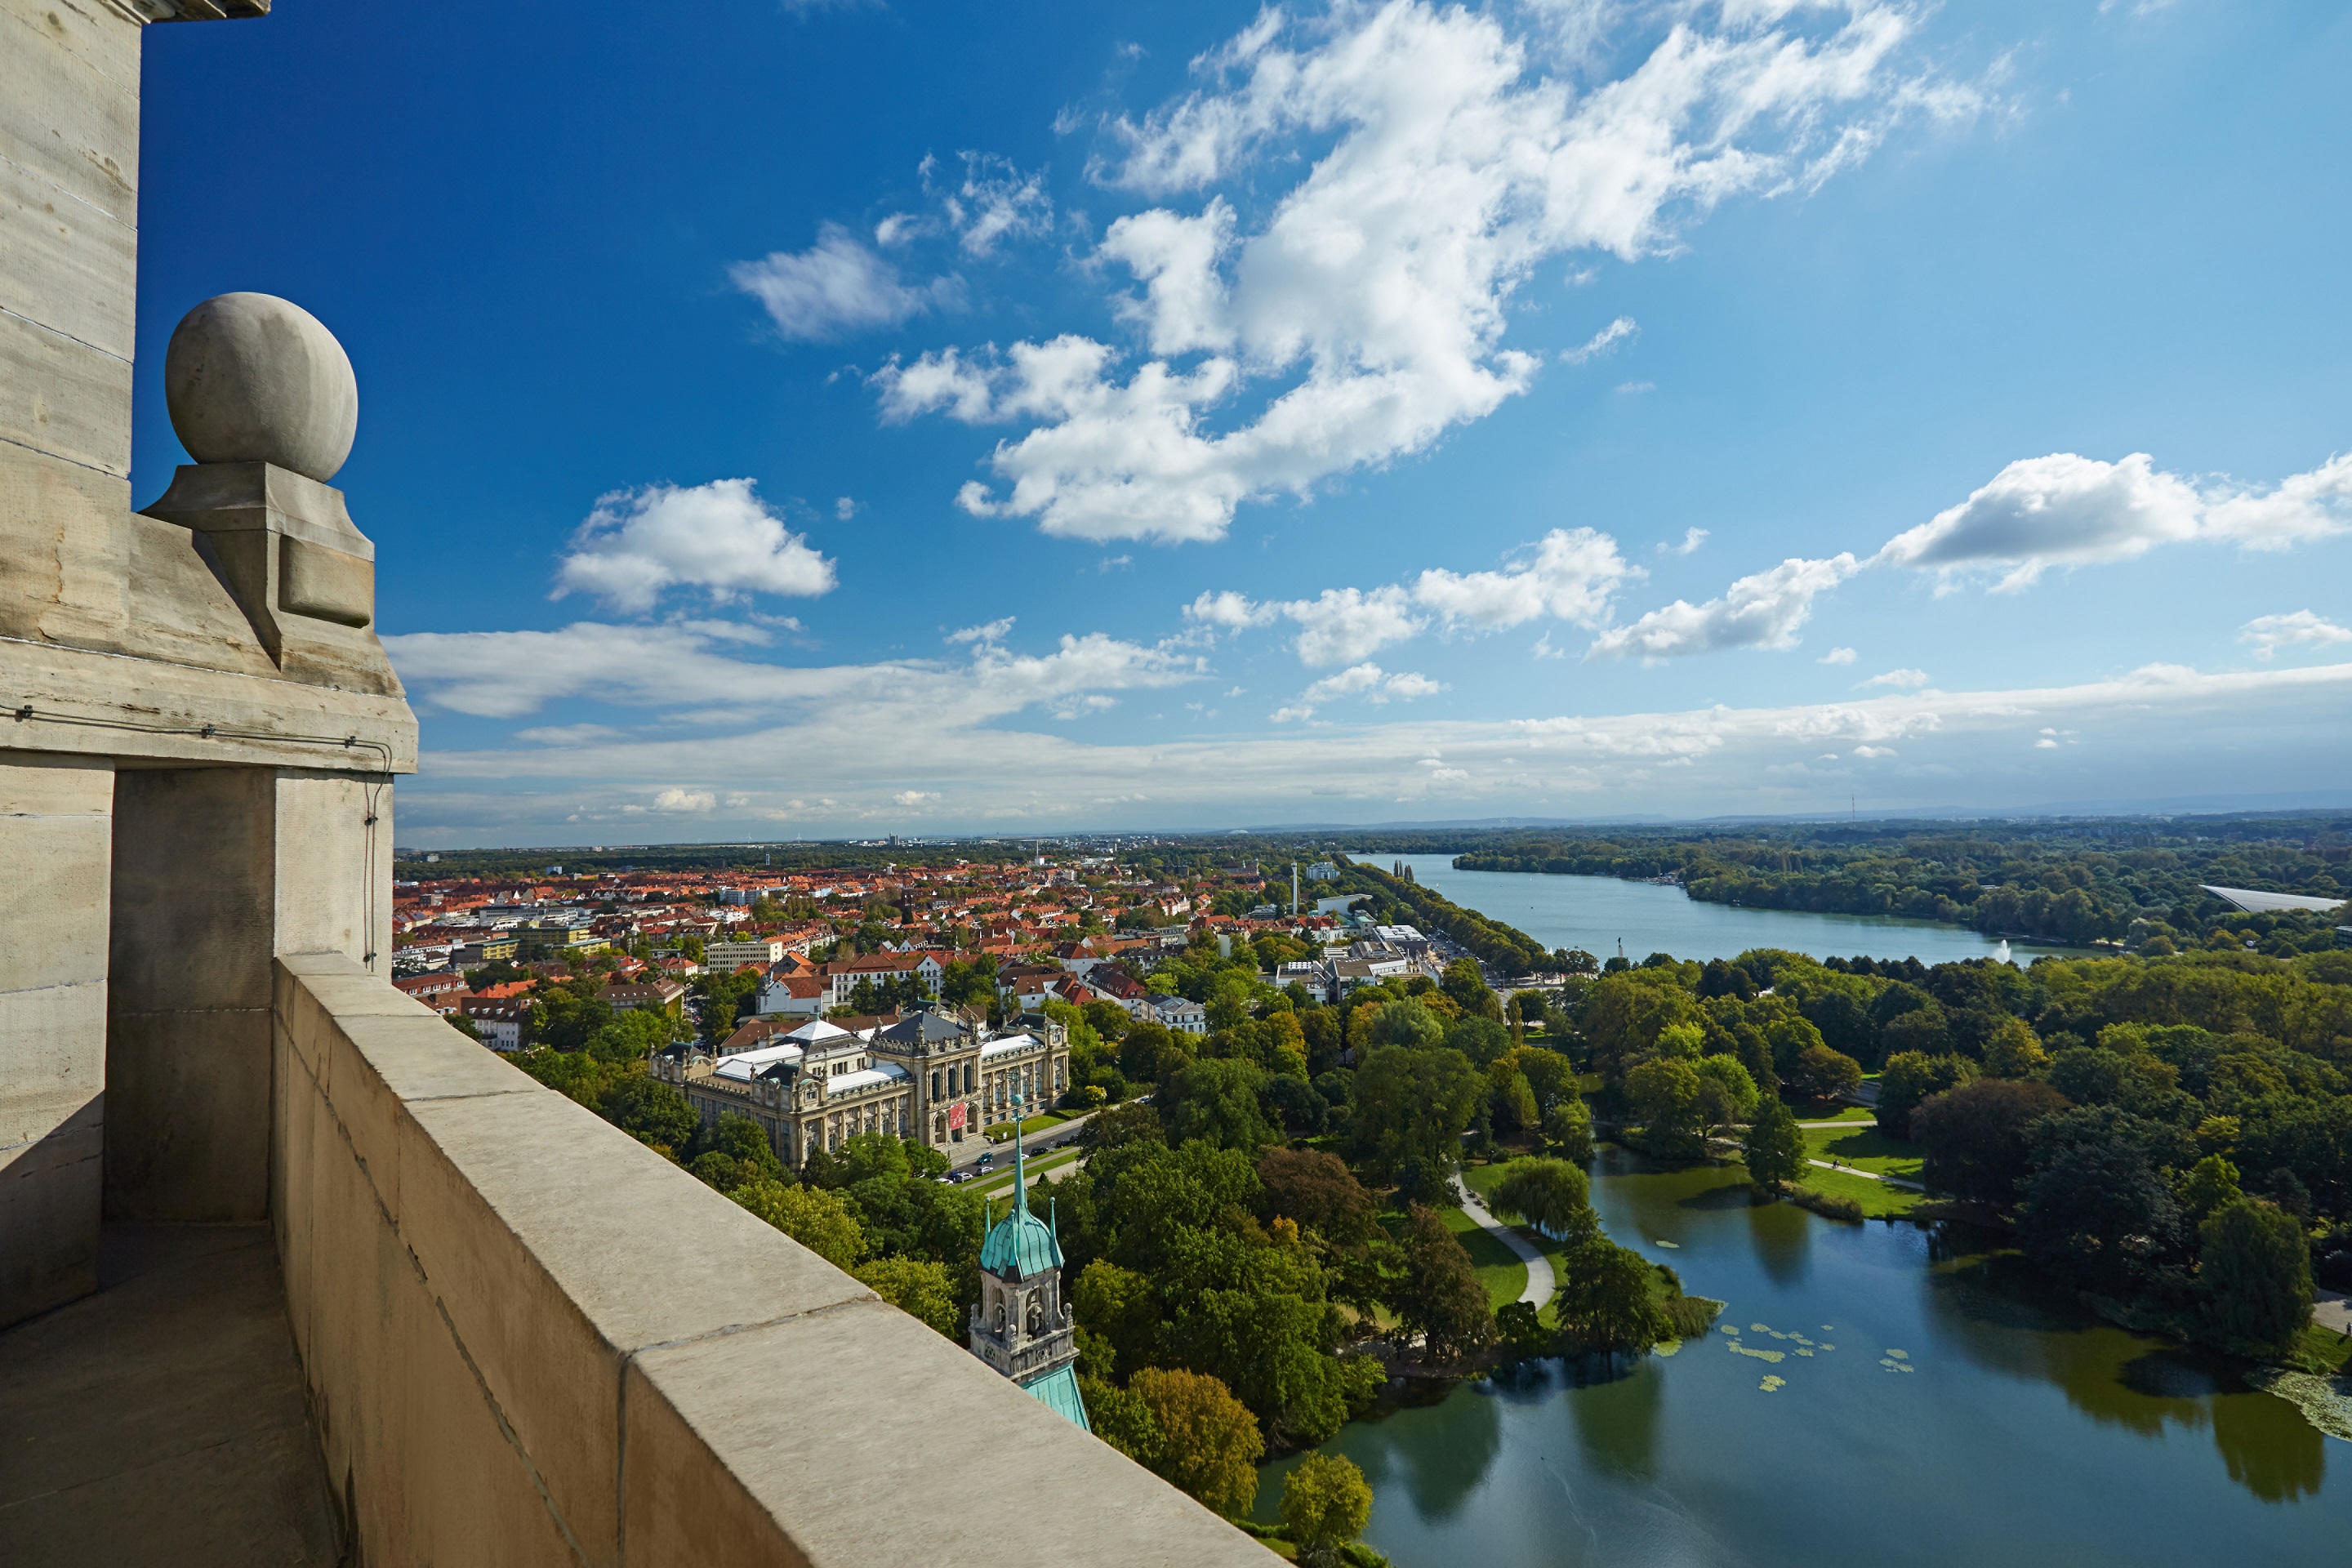 View from the town hall dome in Hanover on the Maschsee with the southern city.